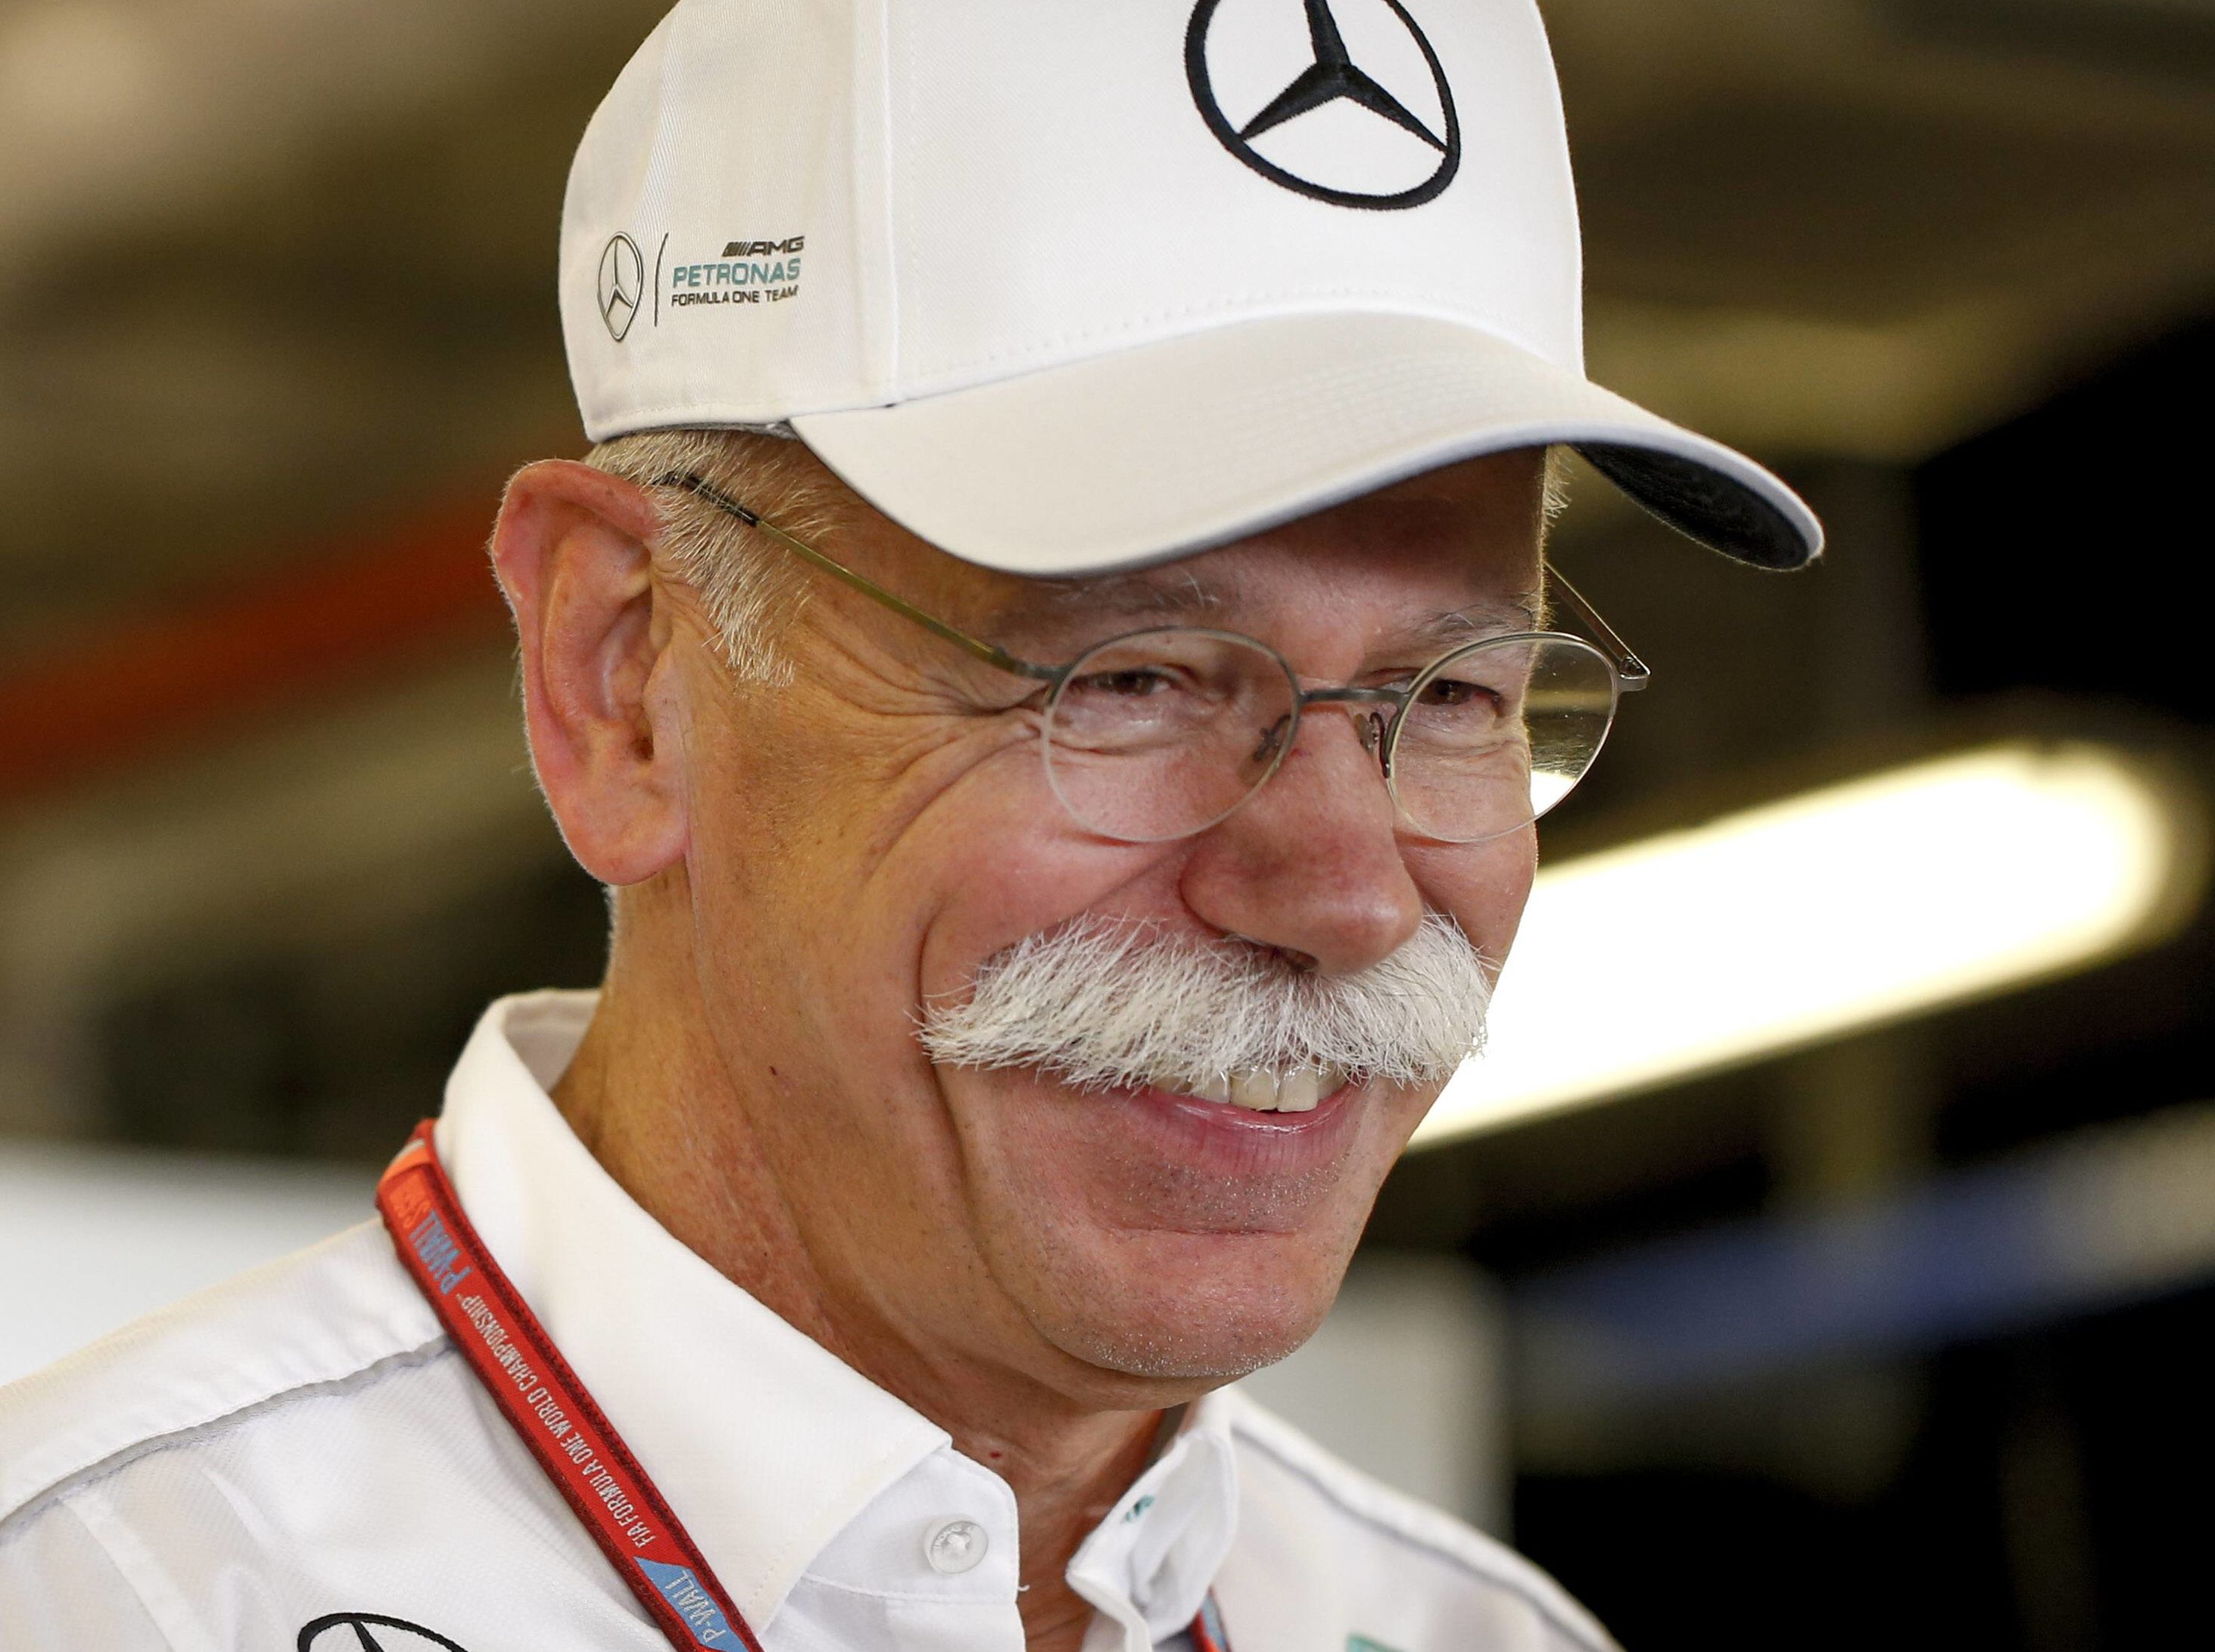 Zetsche to leave Daimler for TUI in 2018